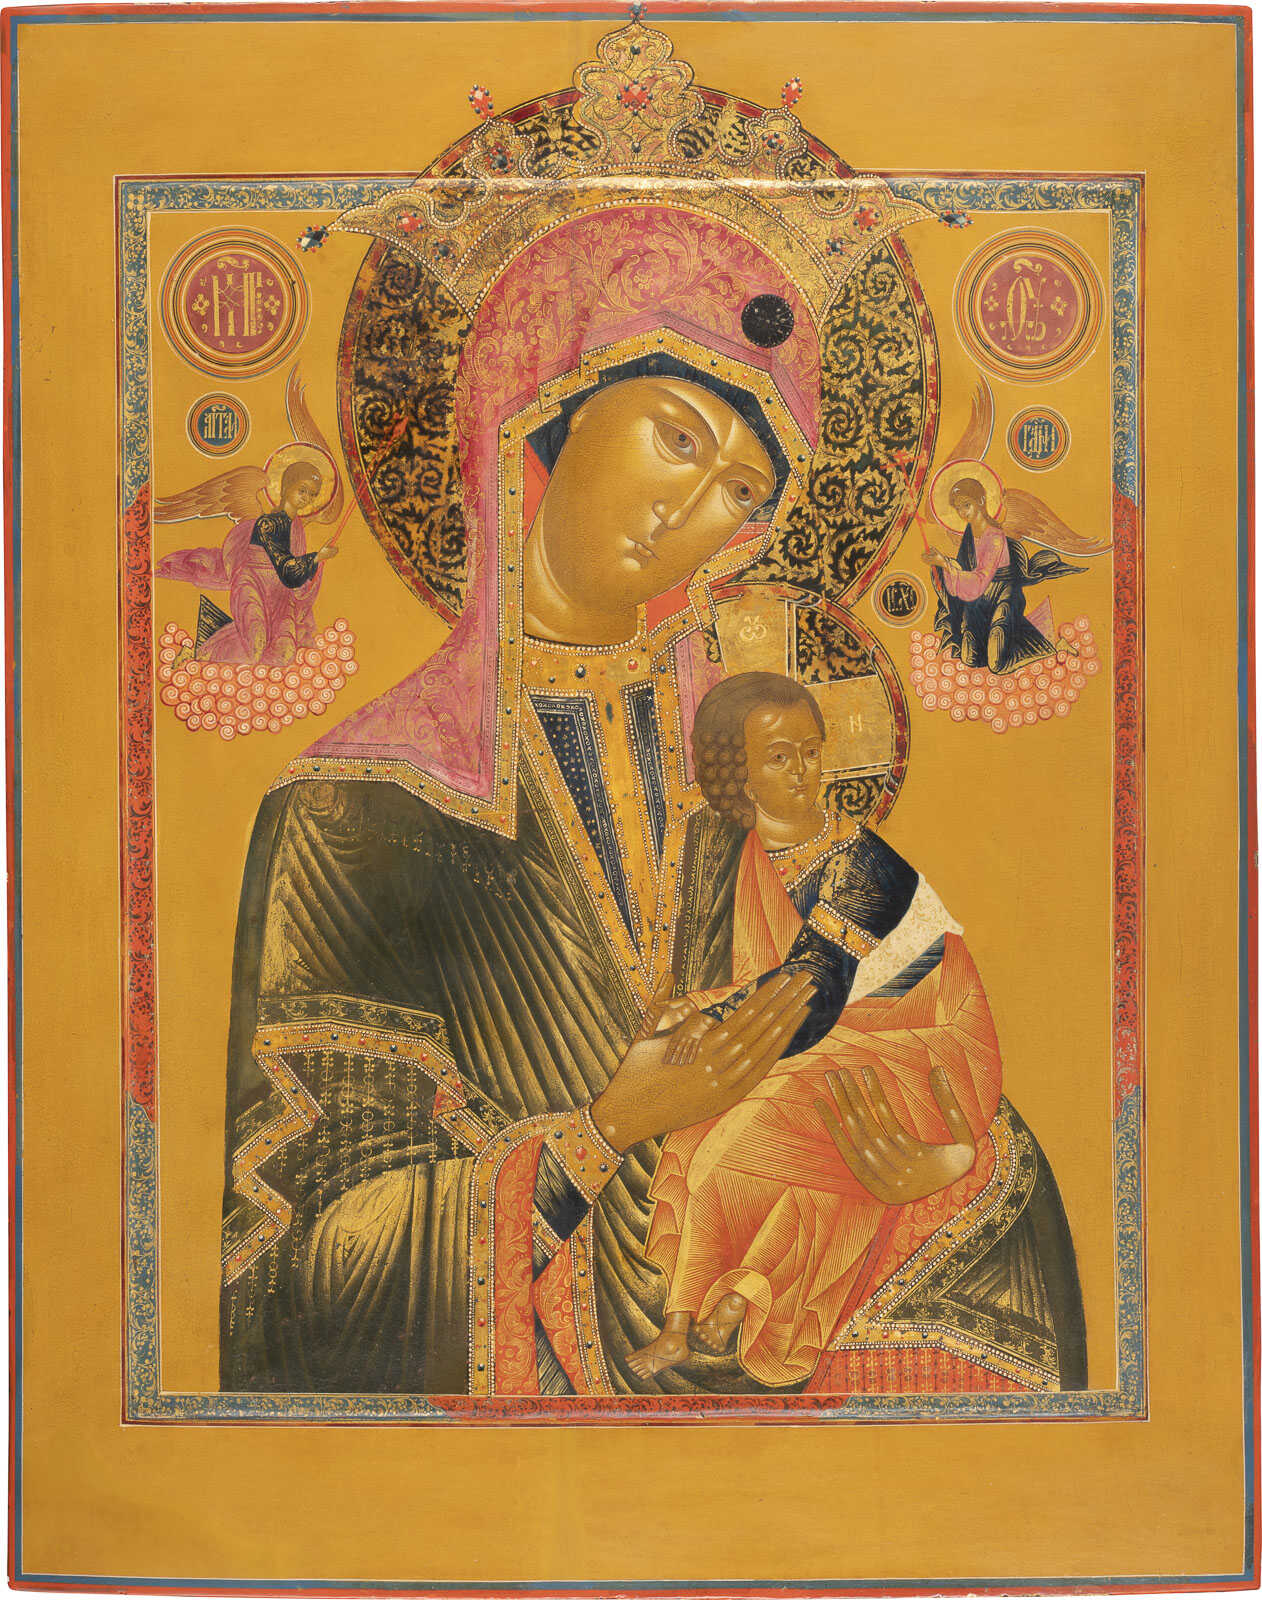 A MONUMENTAL AND VERY FINE ICON SHOWING THE MOTHER OF GO